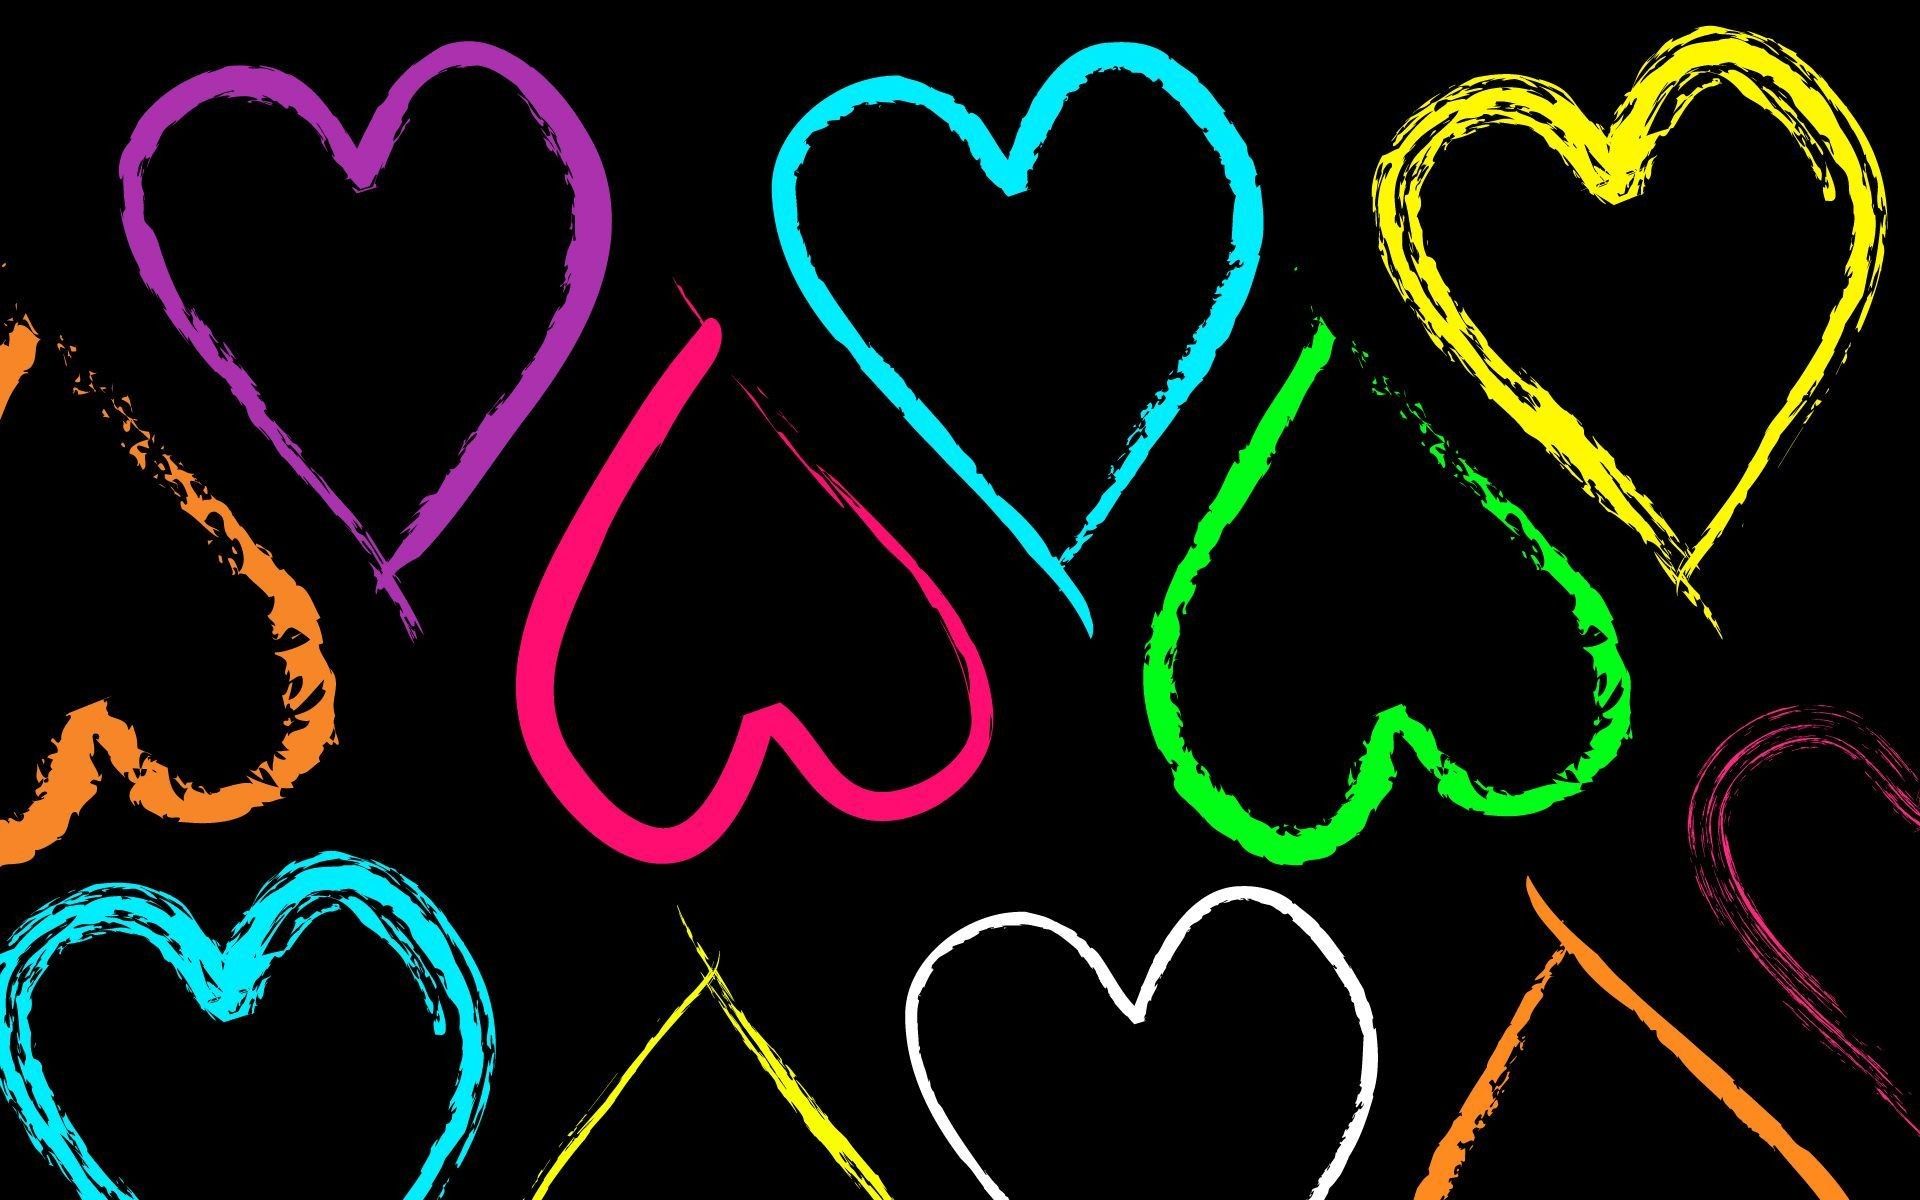 Free Neon Heart Wallpaper HD Full HD Colourful Download Wallpaper Quality Image Computer Wallpaper Cool Best Artwork 1920x1200